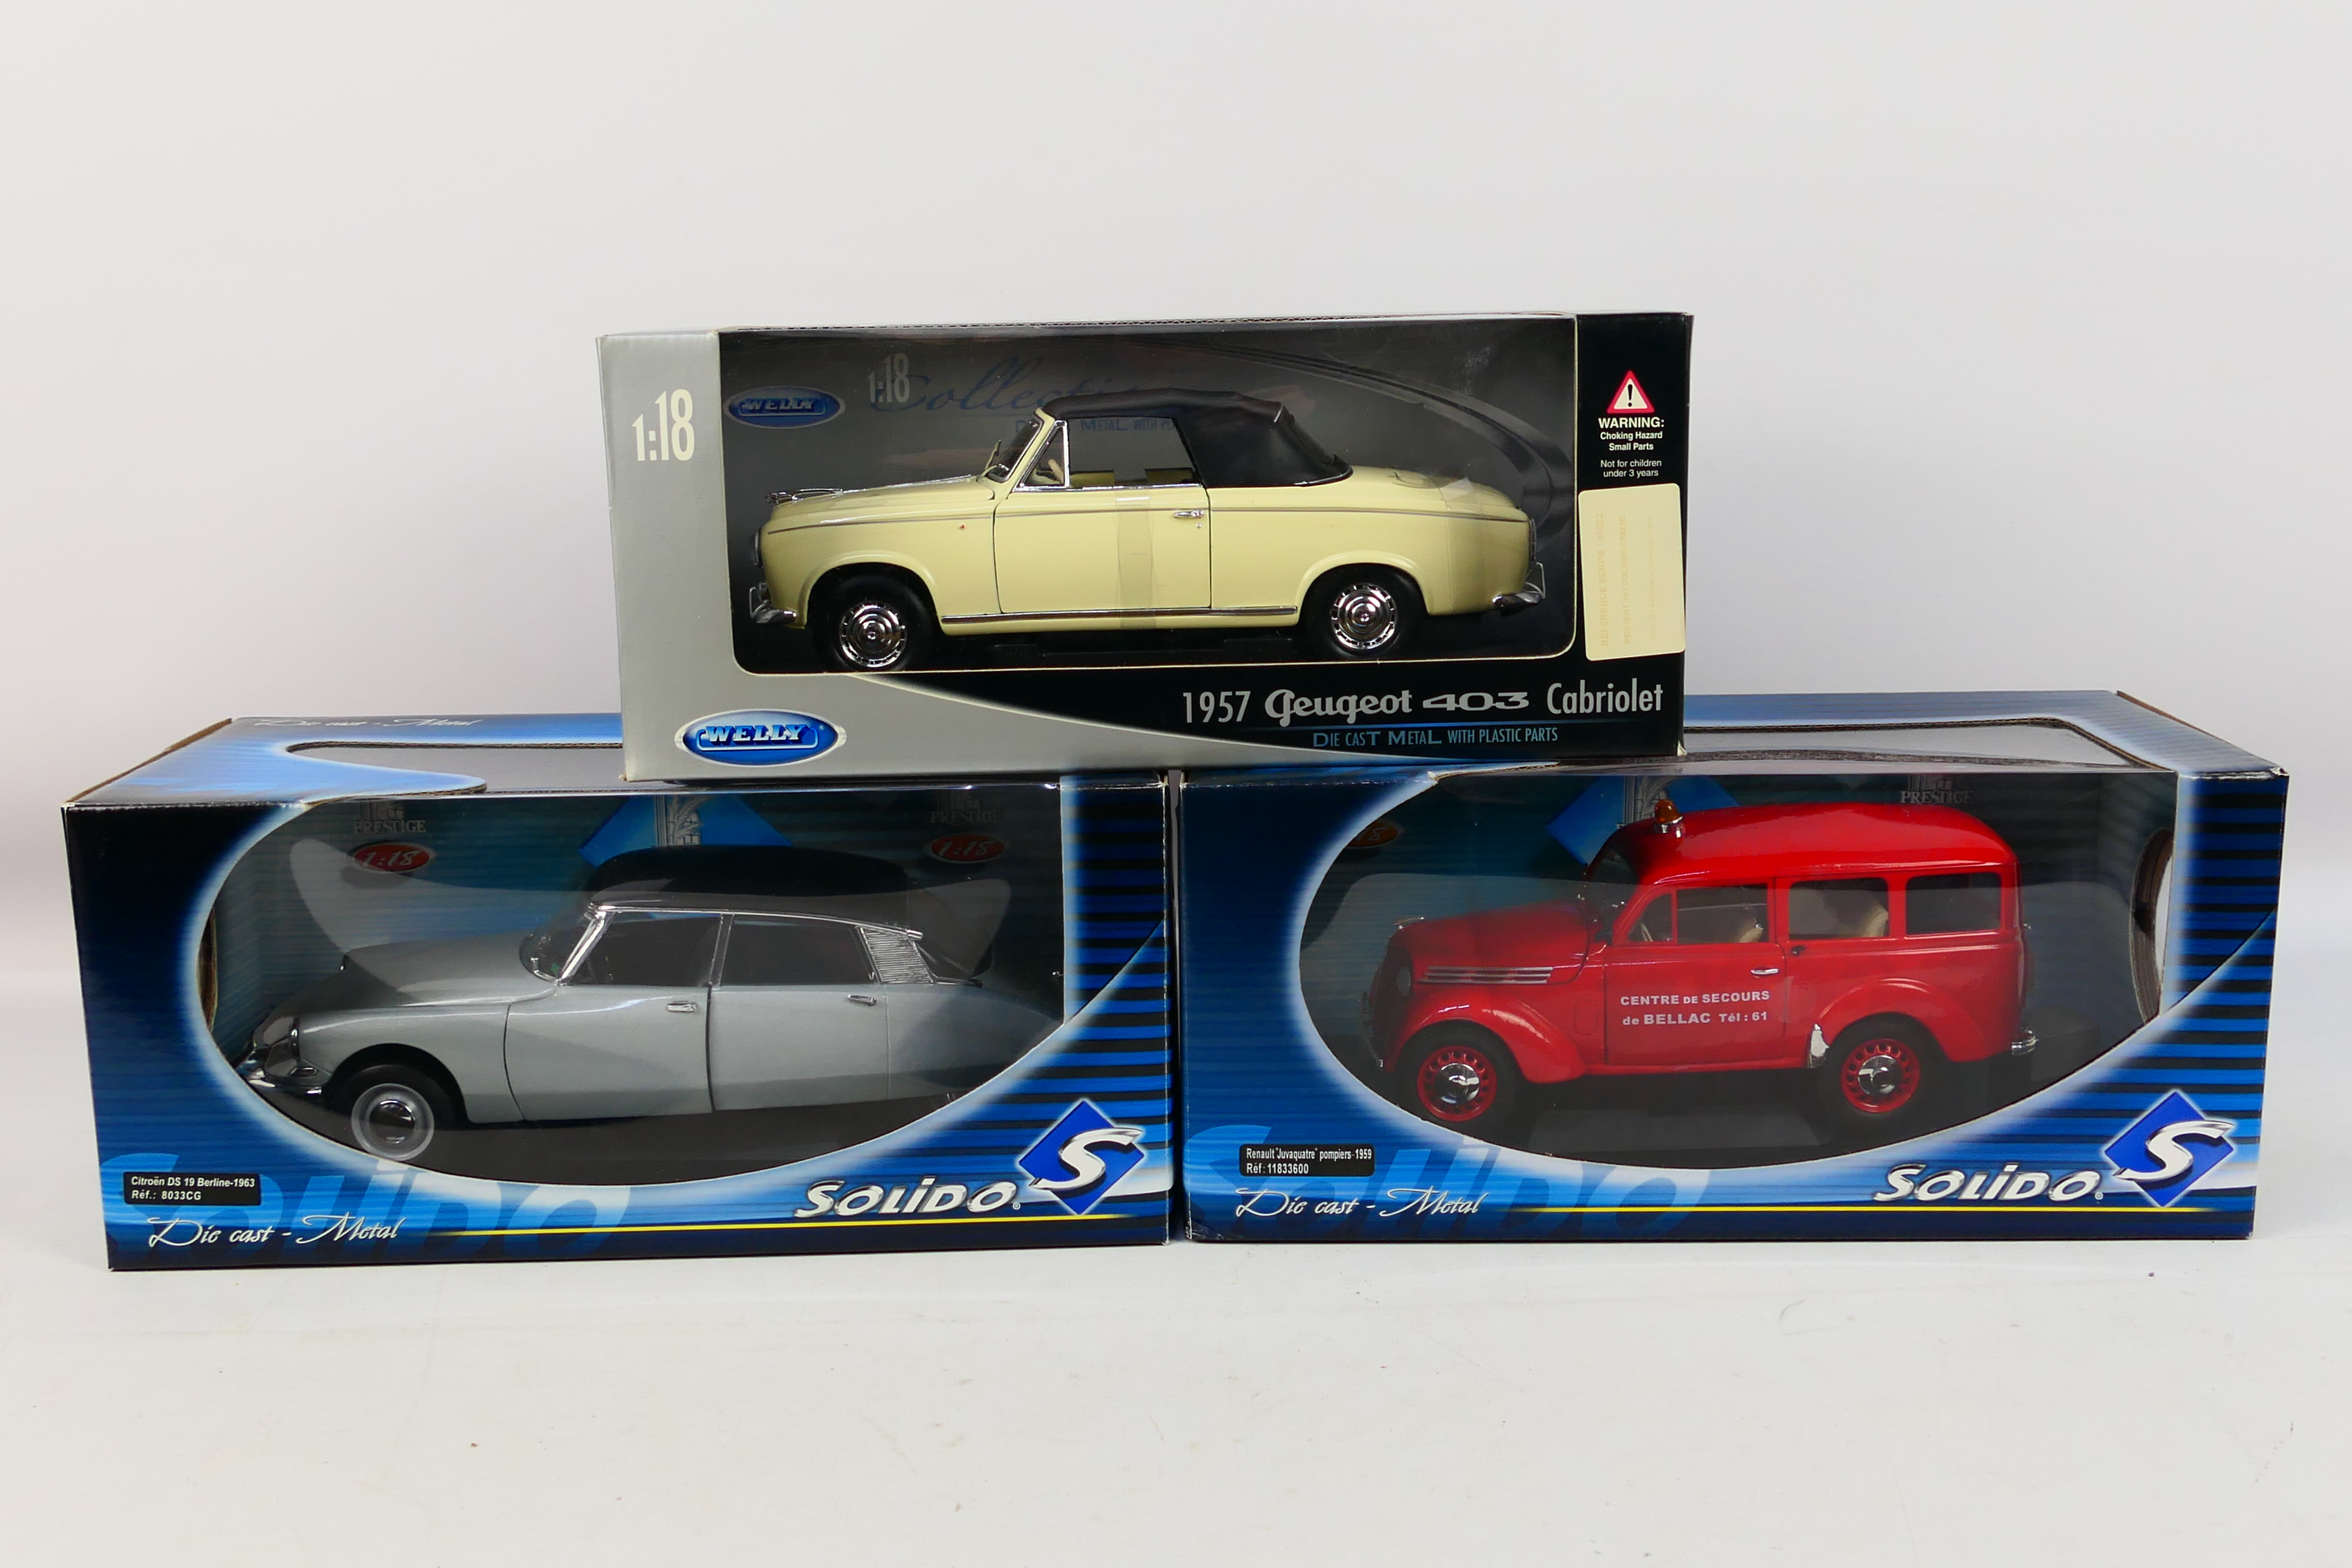 Solido - Welly - Three boxed diecast 1:18 scale model cars.